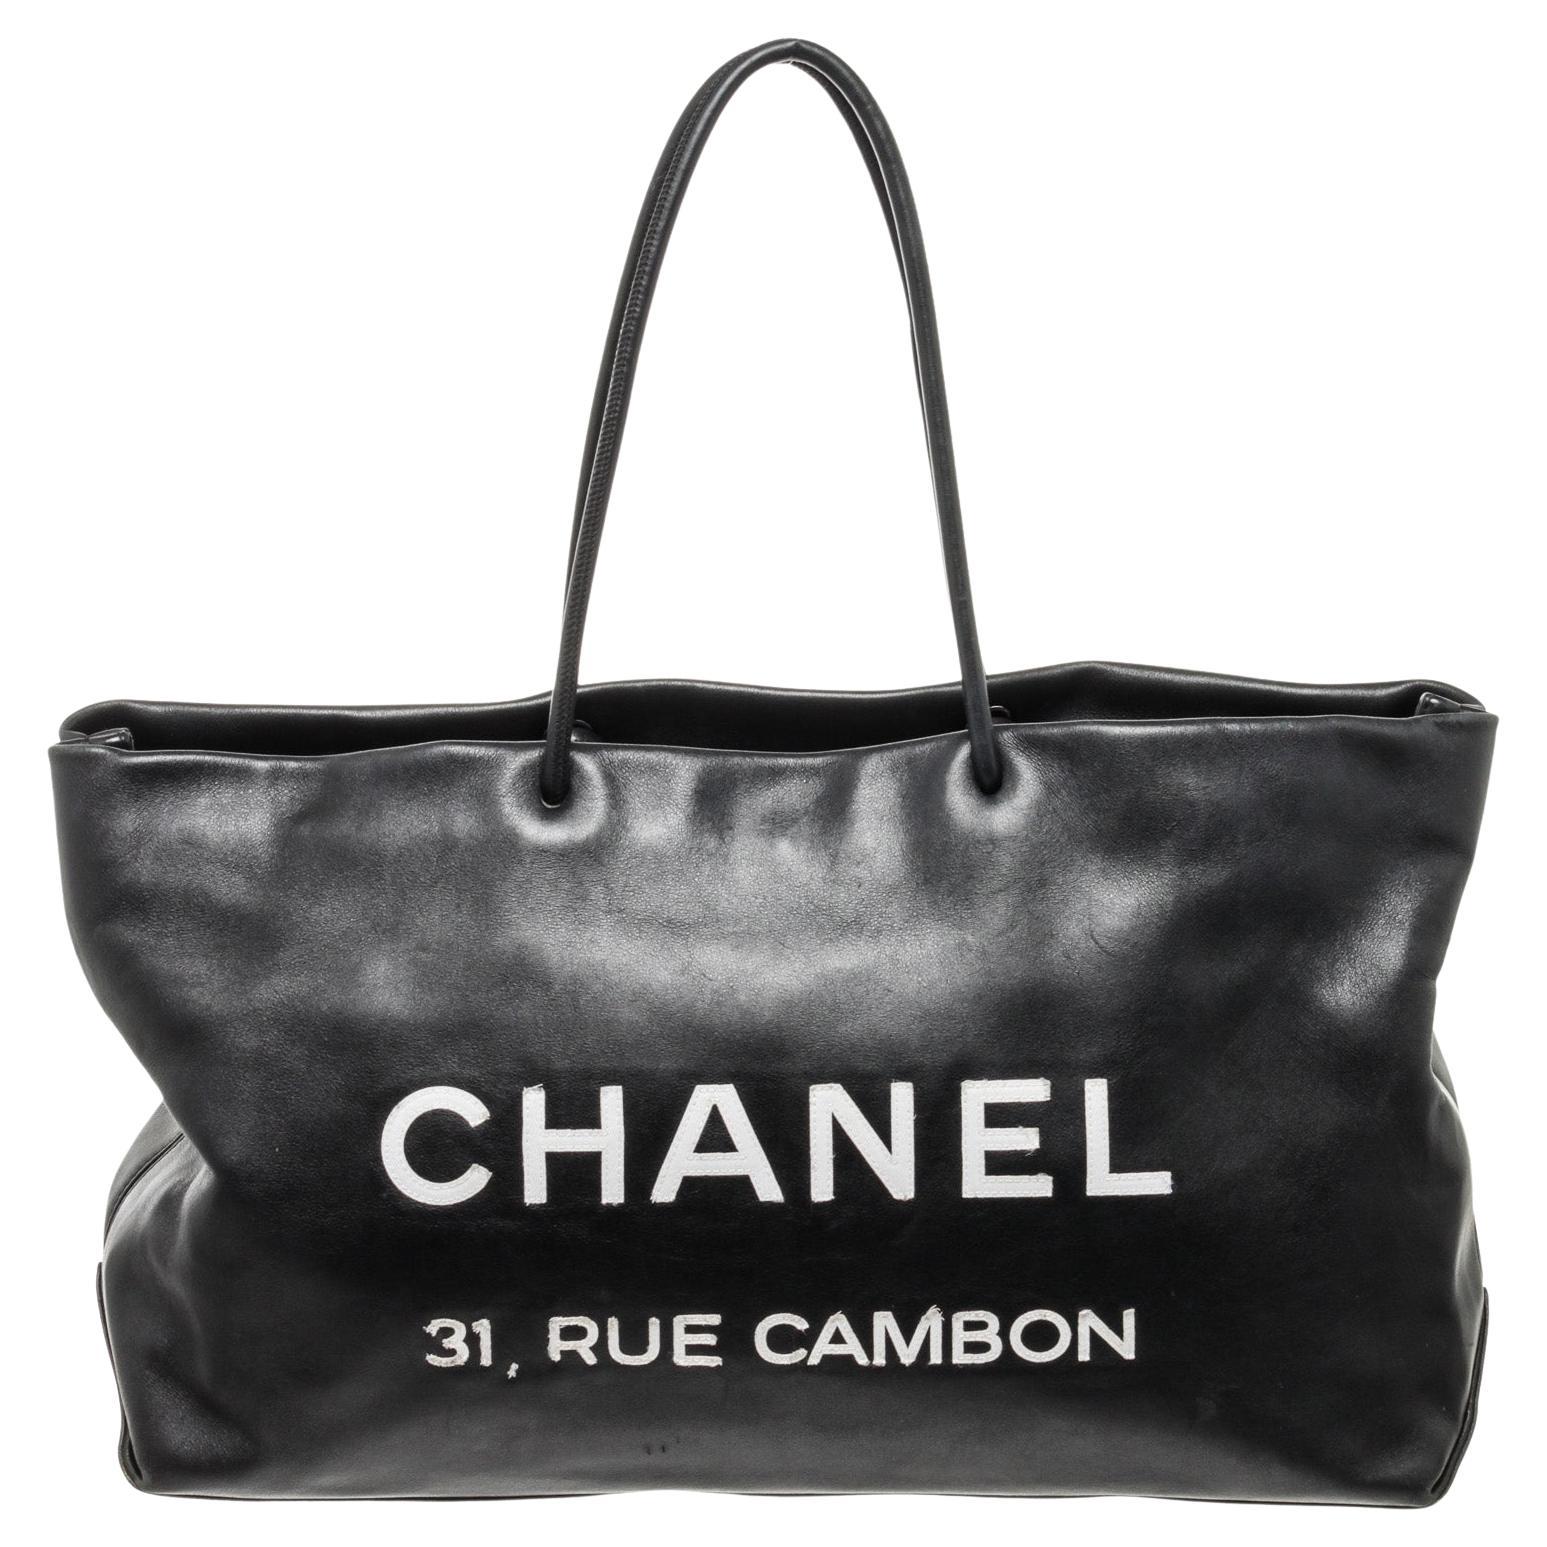 Chanel Black Leather Rue Cambon Tote Bag For Sale